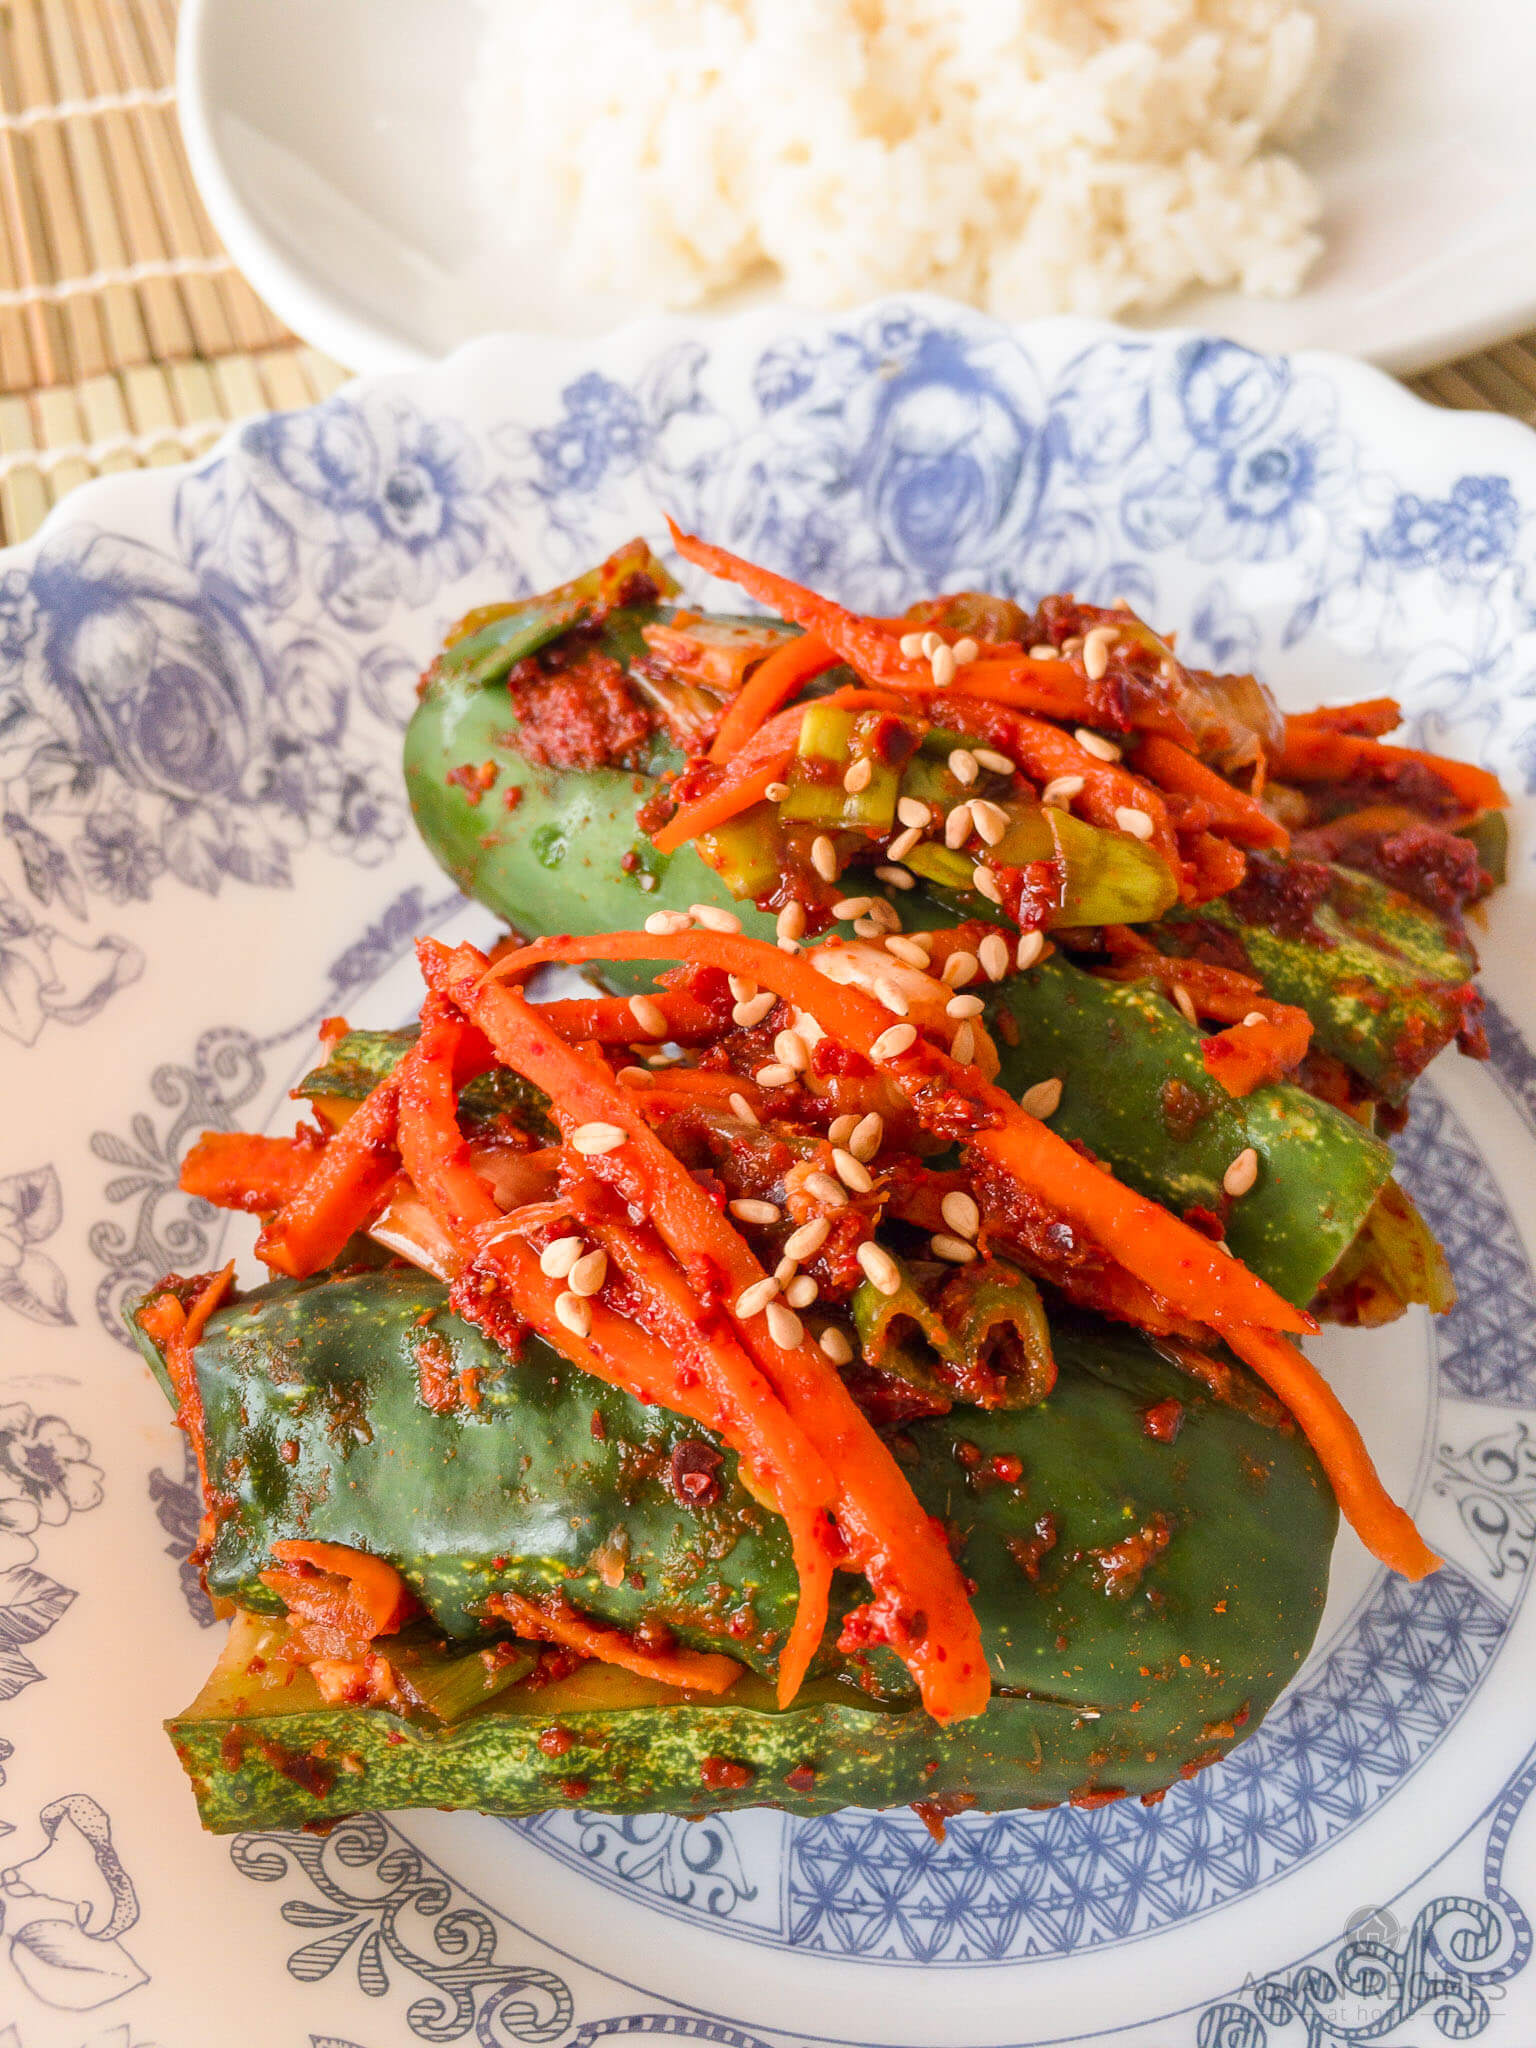 This stuffed Korean cucumber kimchi recipe is so delicious, crunchy, light, and spicy. Perfect for a hot summer day!